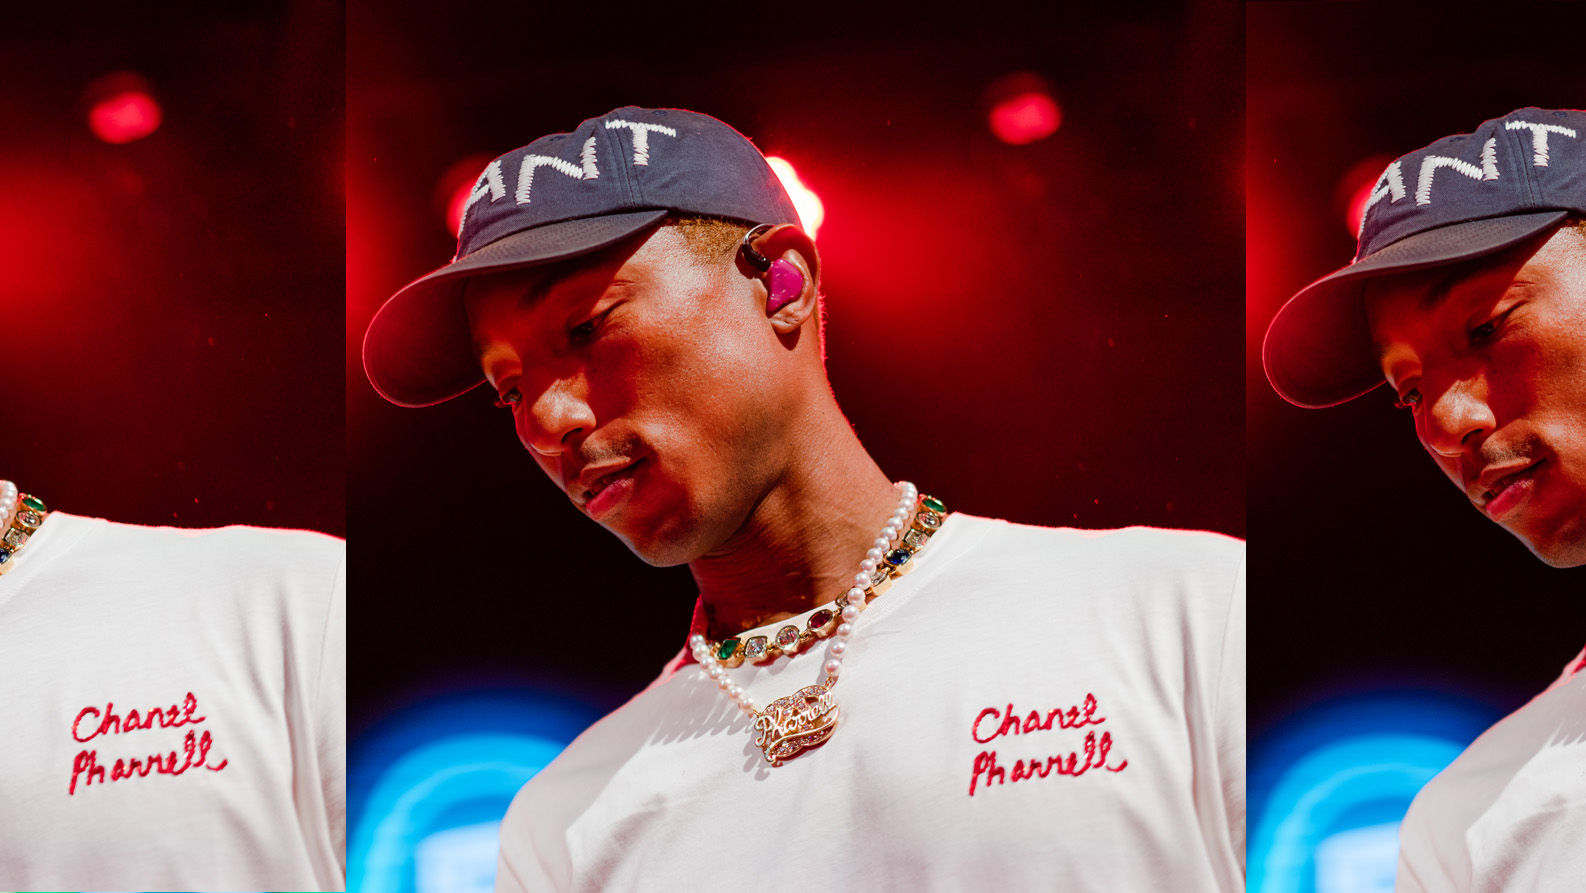 Pharrell Williams offers an urban take on Chanel with highly anticipated  capsule collection